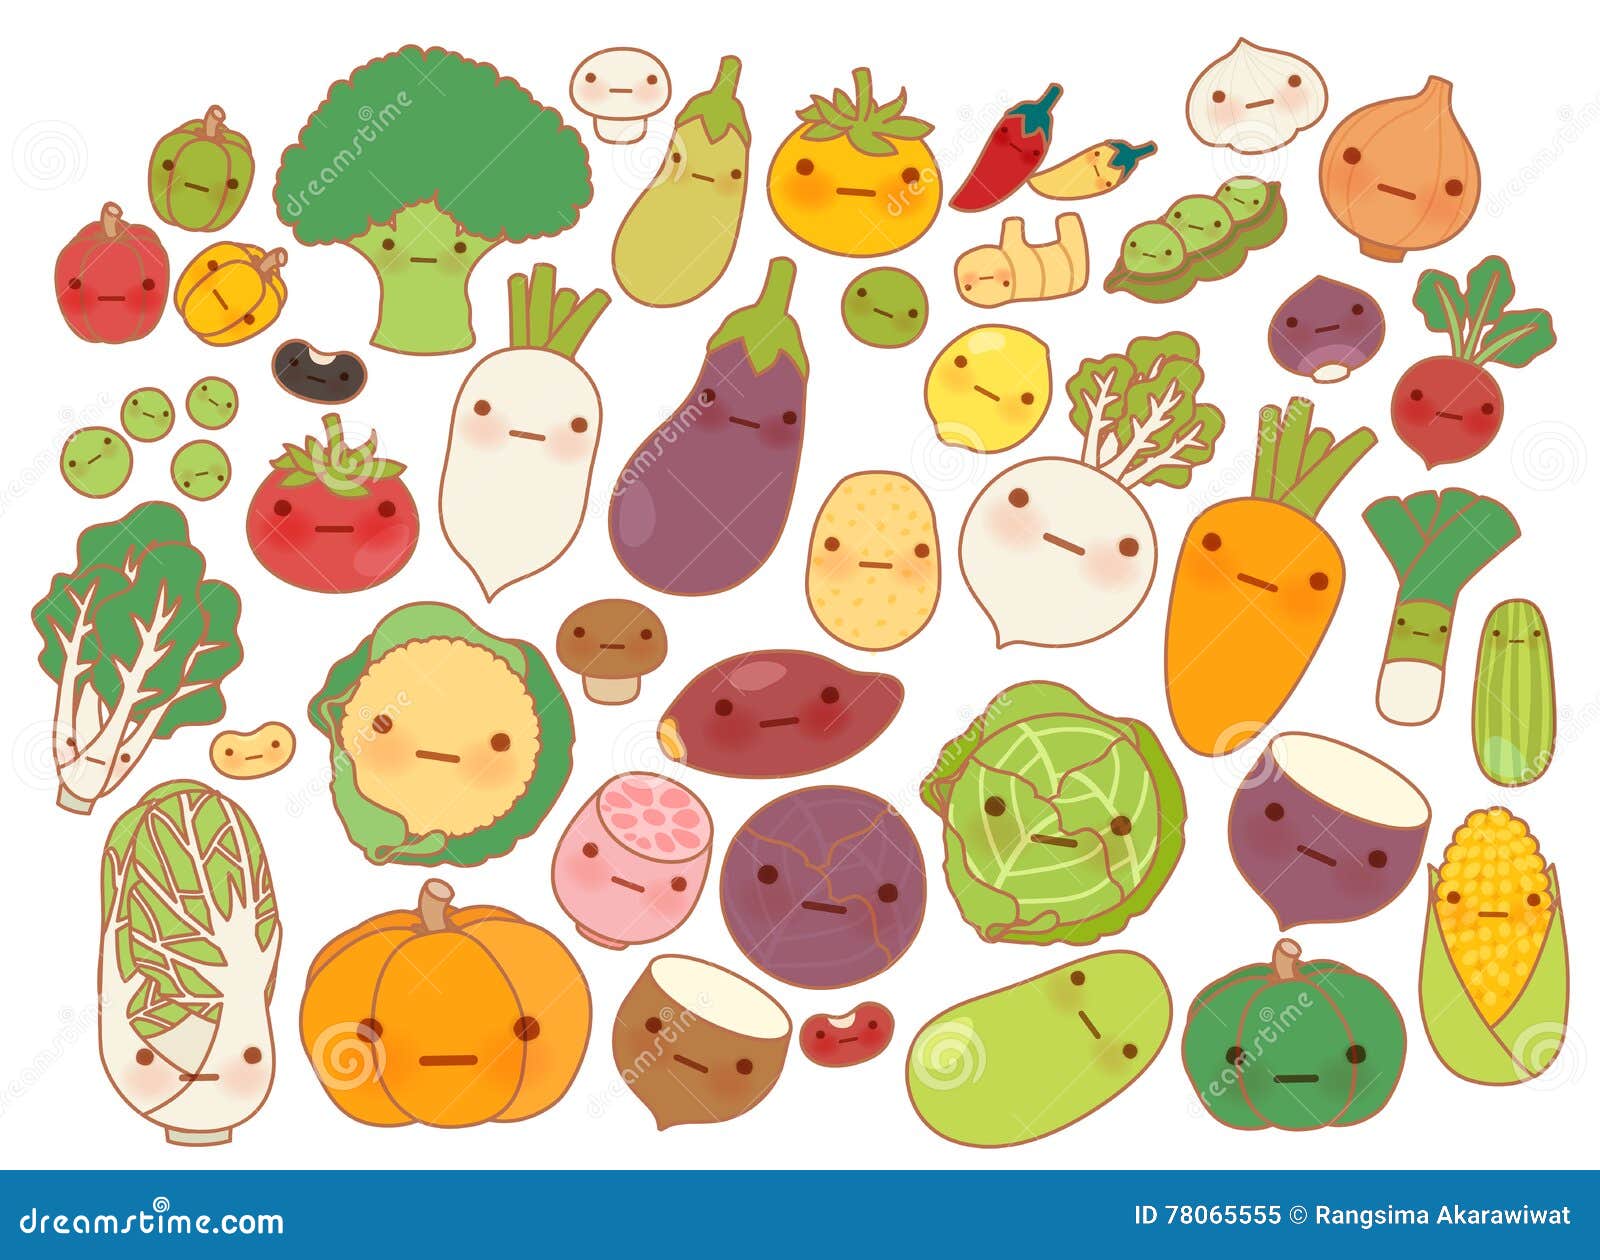 collection of lovely fruit and vegetable icon , cute carrot , adorable turnip , sweet tomato , kawaii potato, girly corn